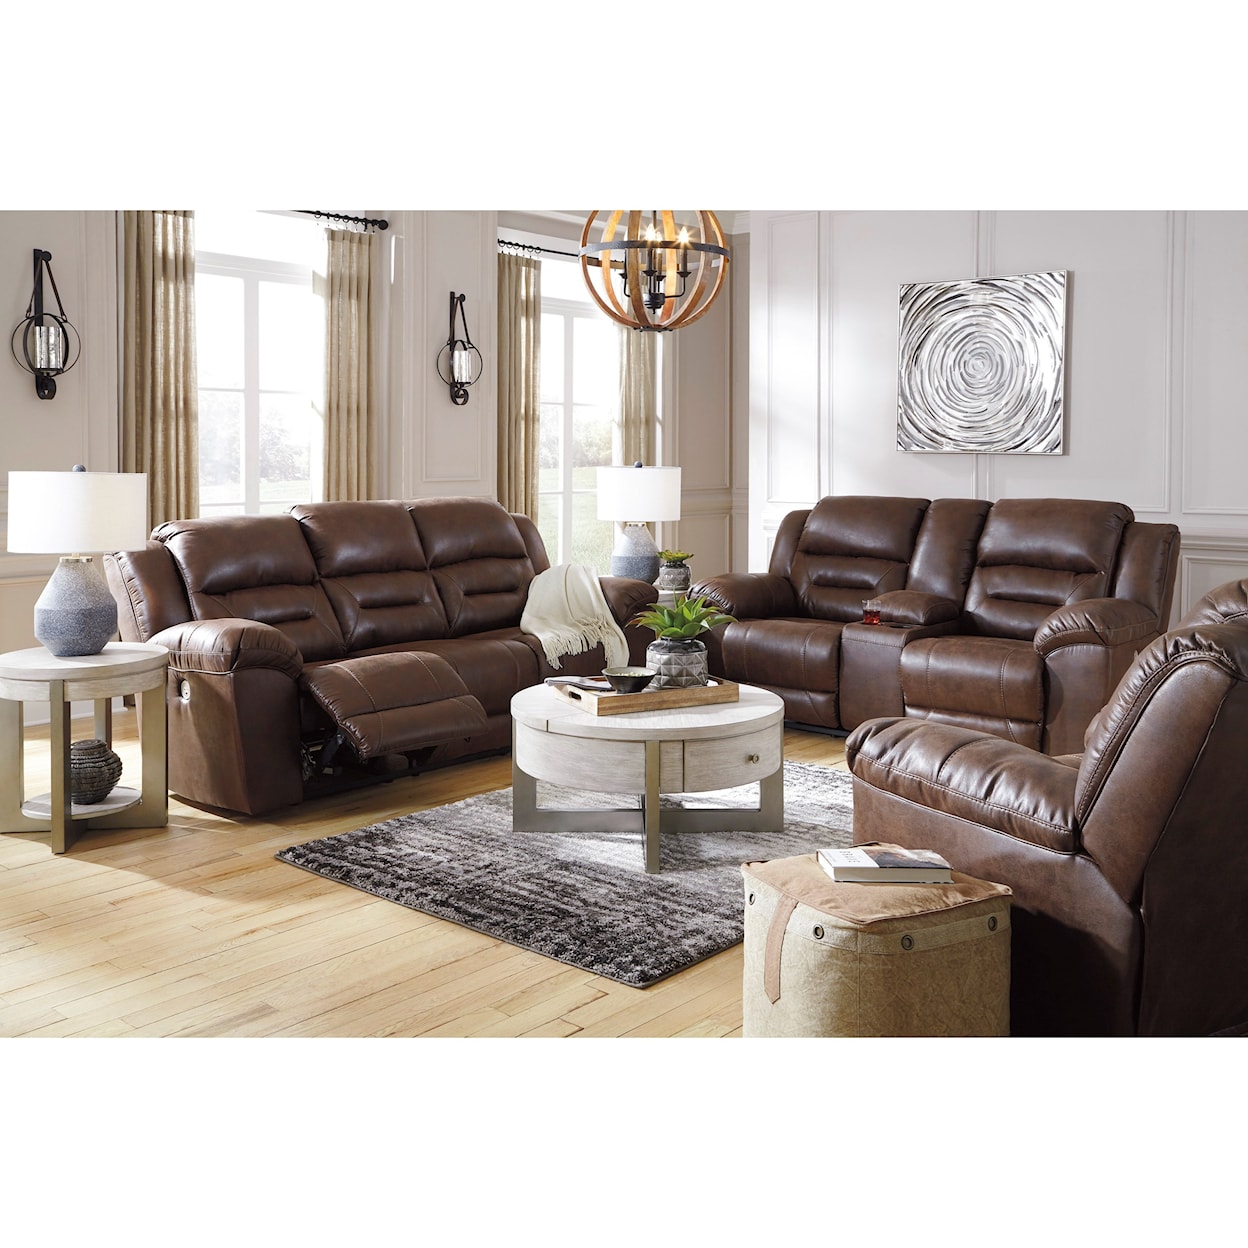 Signature Design by Ashley Stoneland Reclining Living Room Group